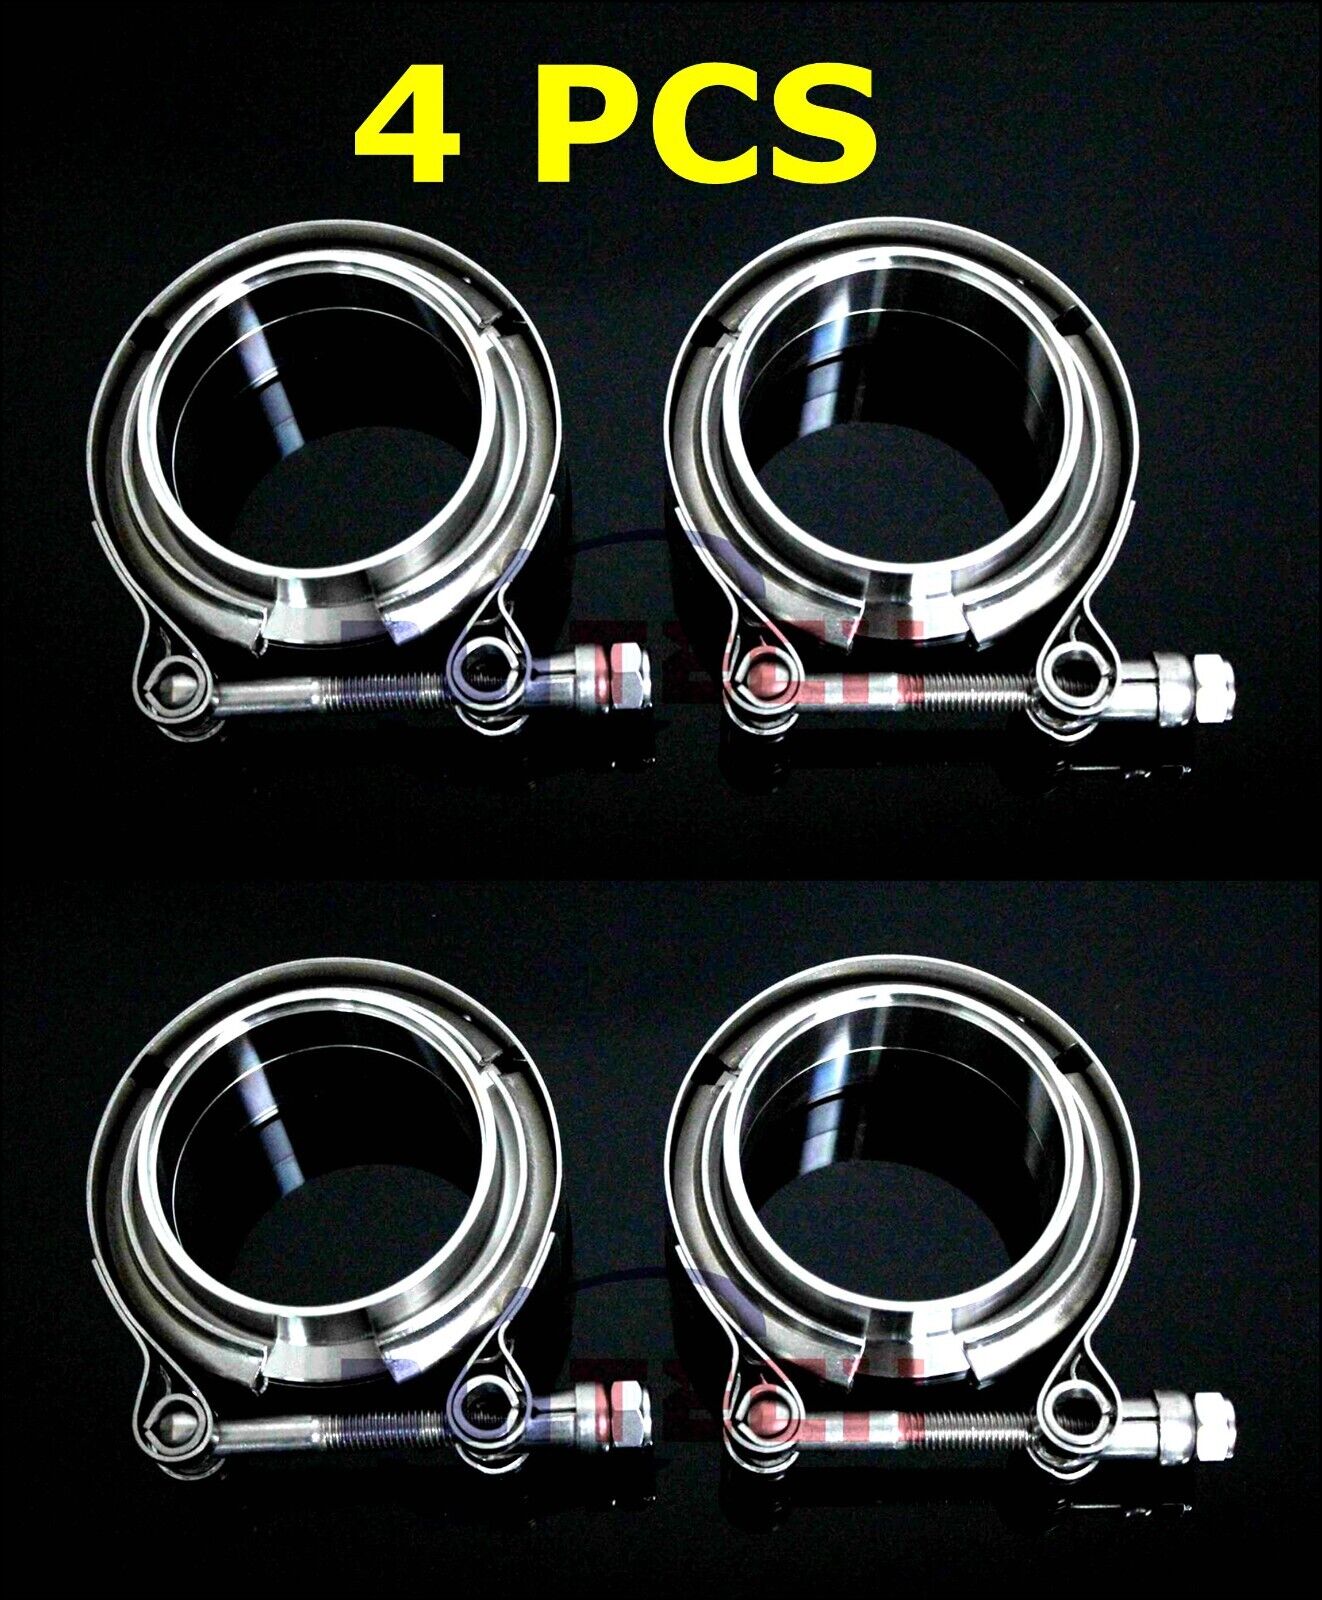 4PC V-band Clamp stainless steel 4 Inch Flange Turbo Exhaust Down Pipes Kit